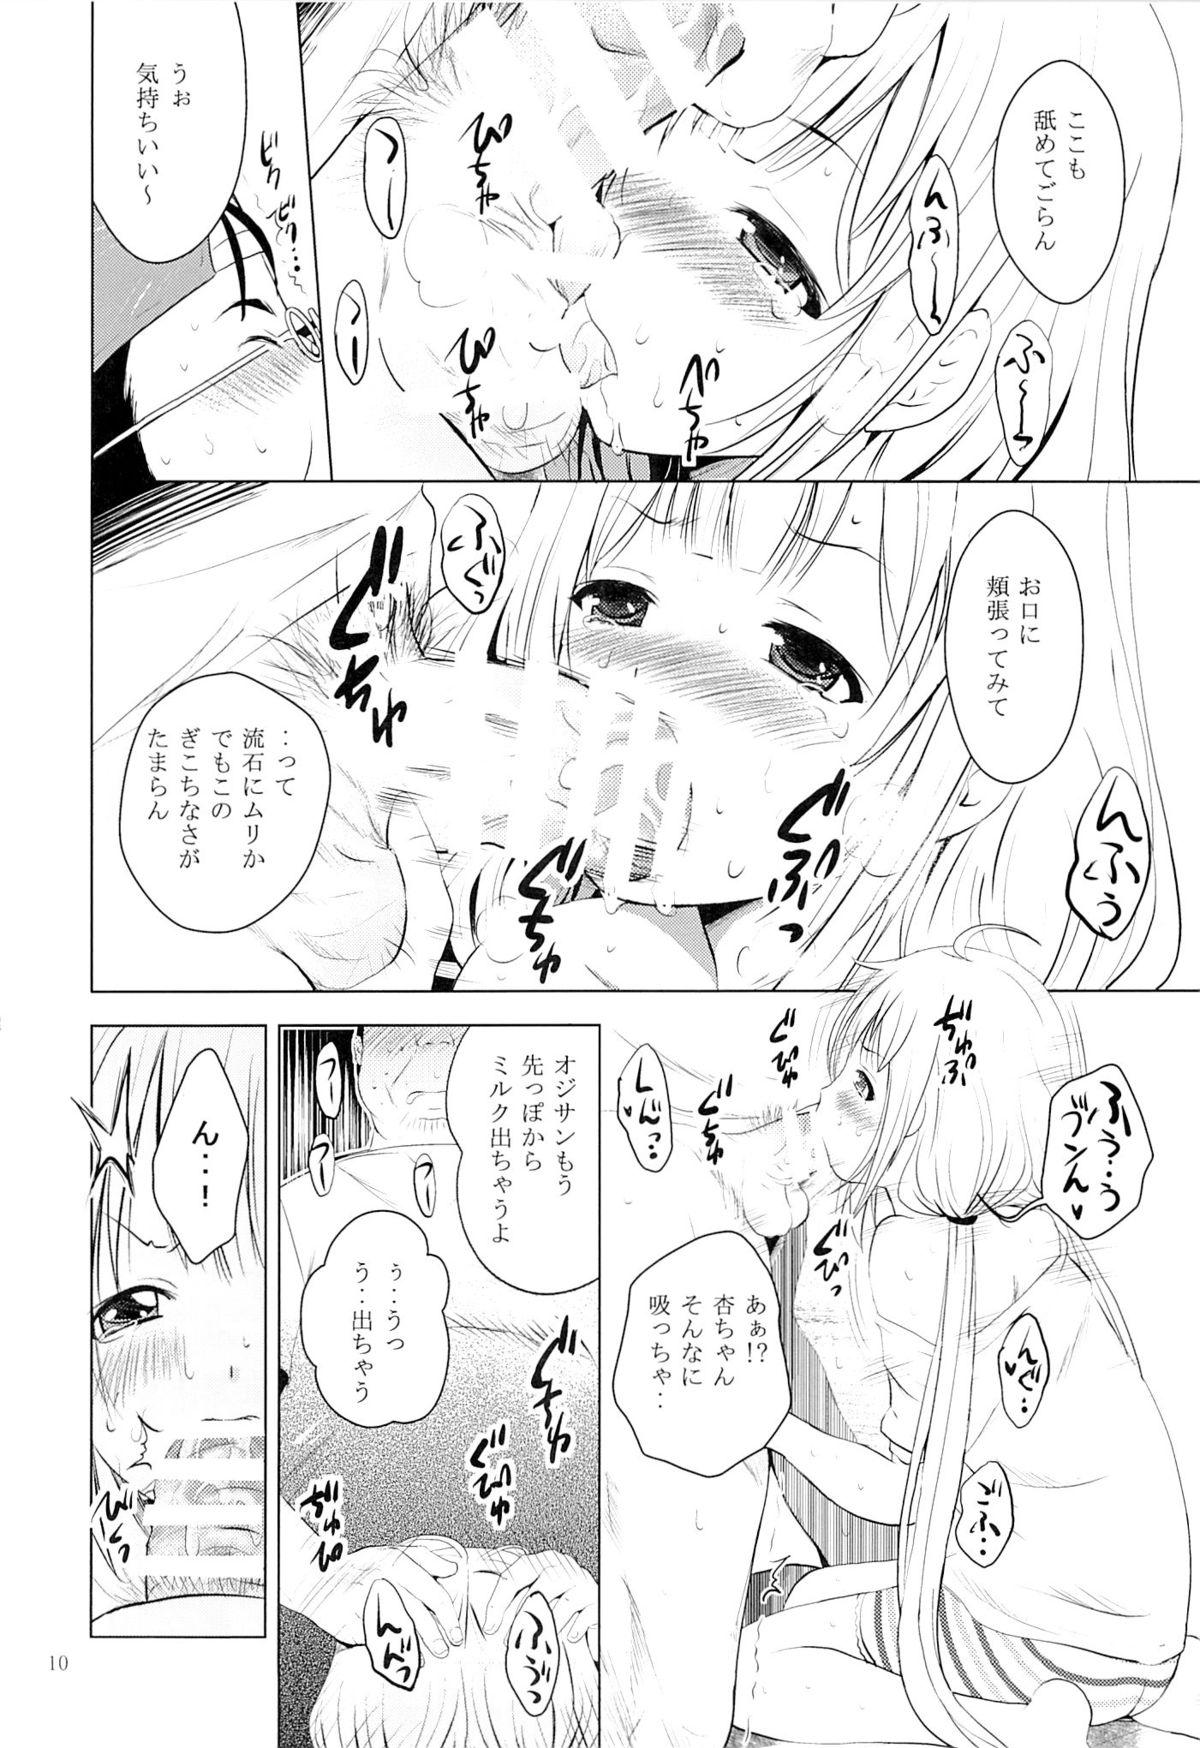  MOUSOU Mini Theater 37 - The idolmaster Gay Orgy - Page 9